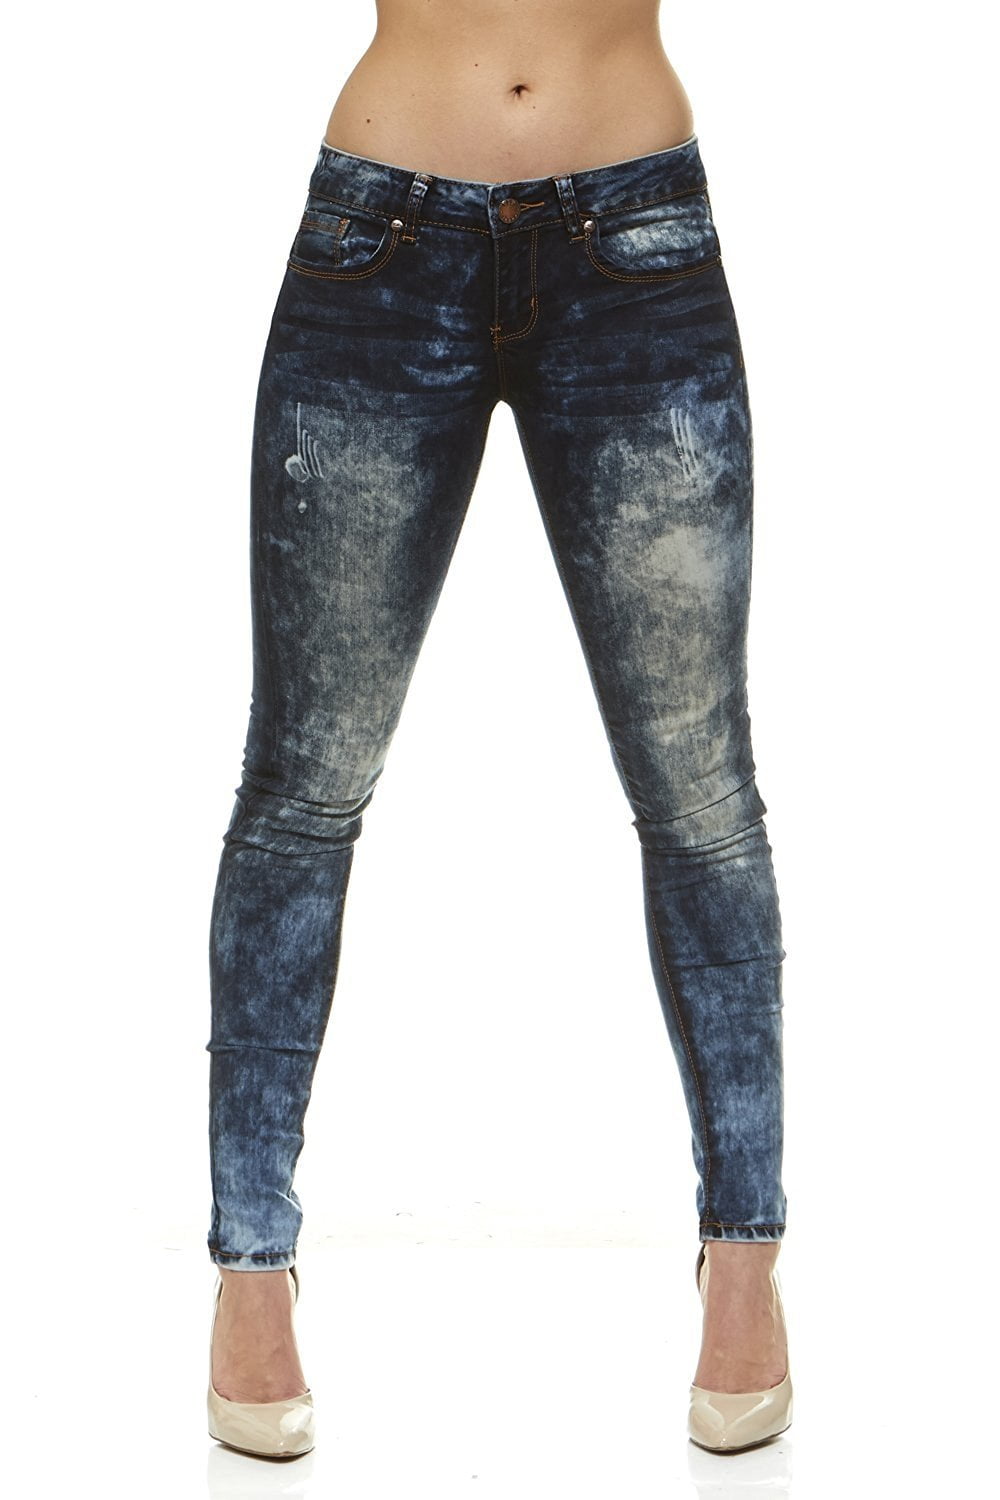 Classic Skinny Jeans for Women Slim Fit Stretch Stone Washed Jeans Juniors  Sizes 7 Electric Blue